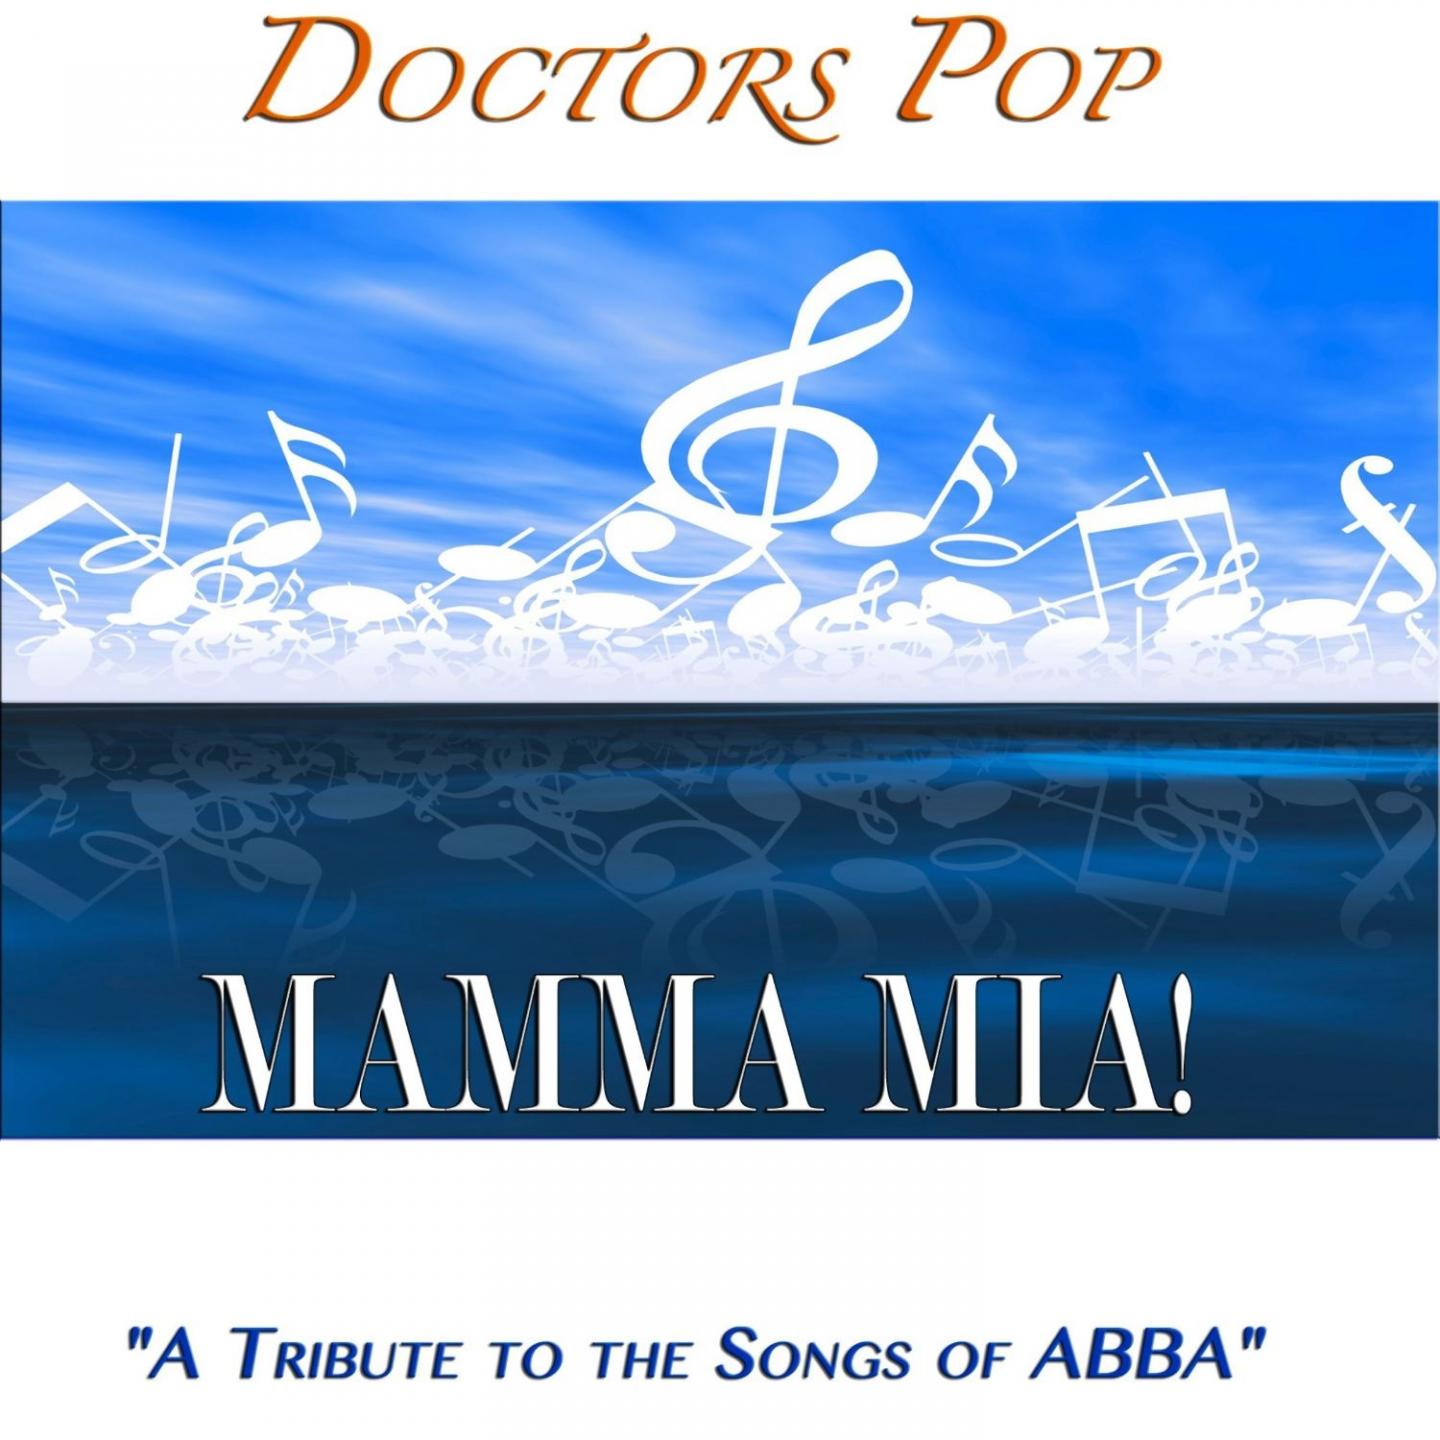 Mamma Mia "A Tribute To the Songs of Abba"